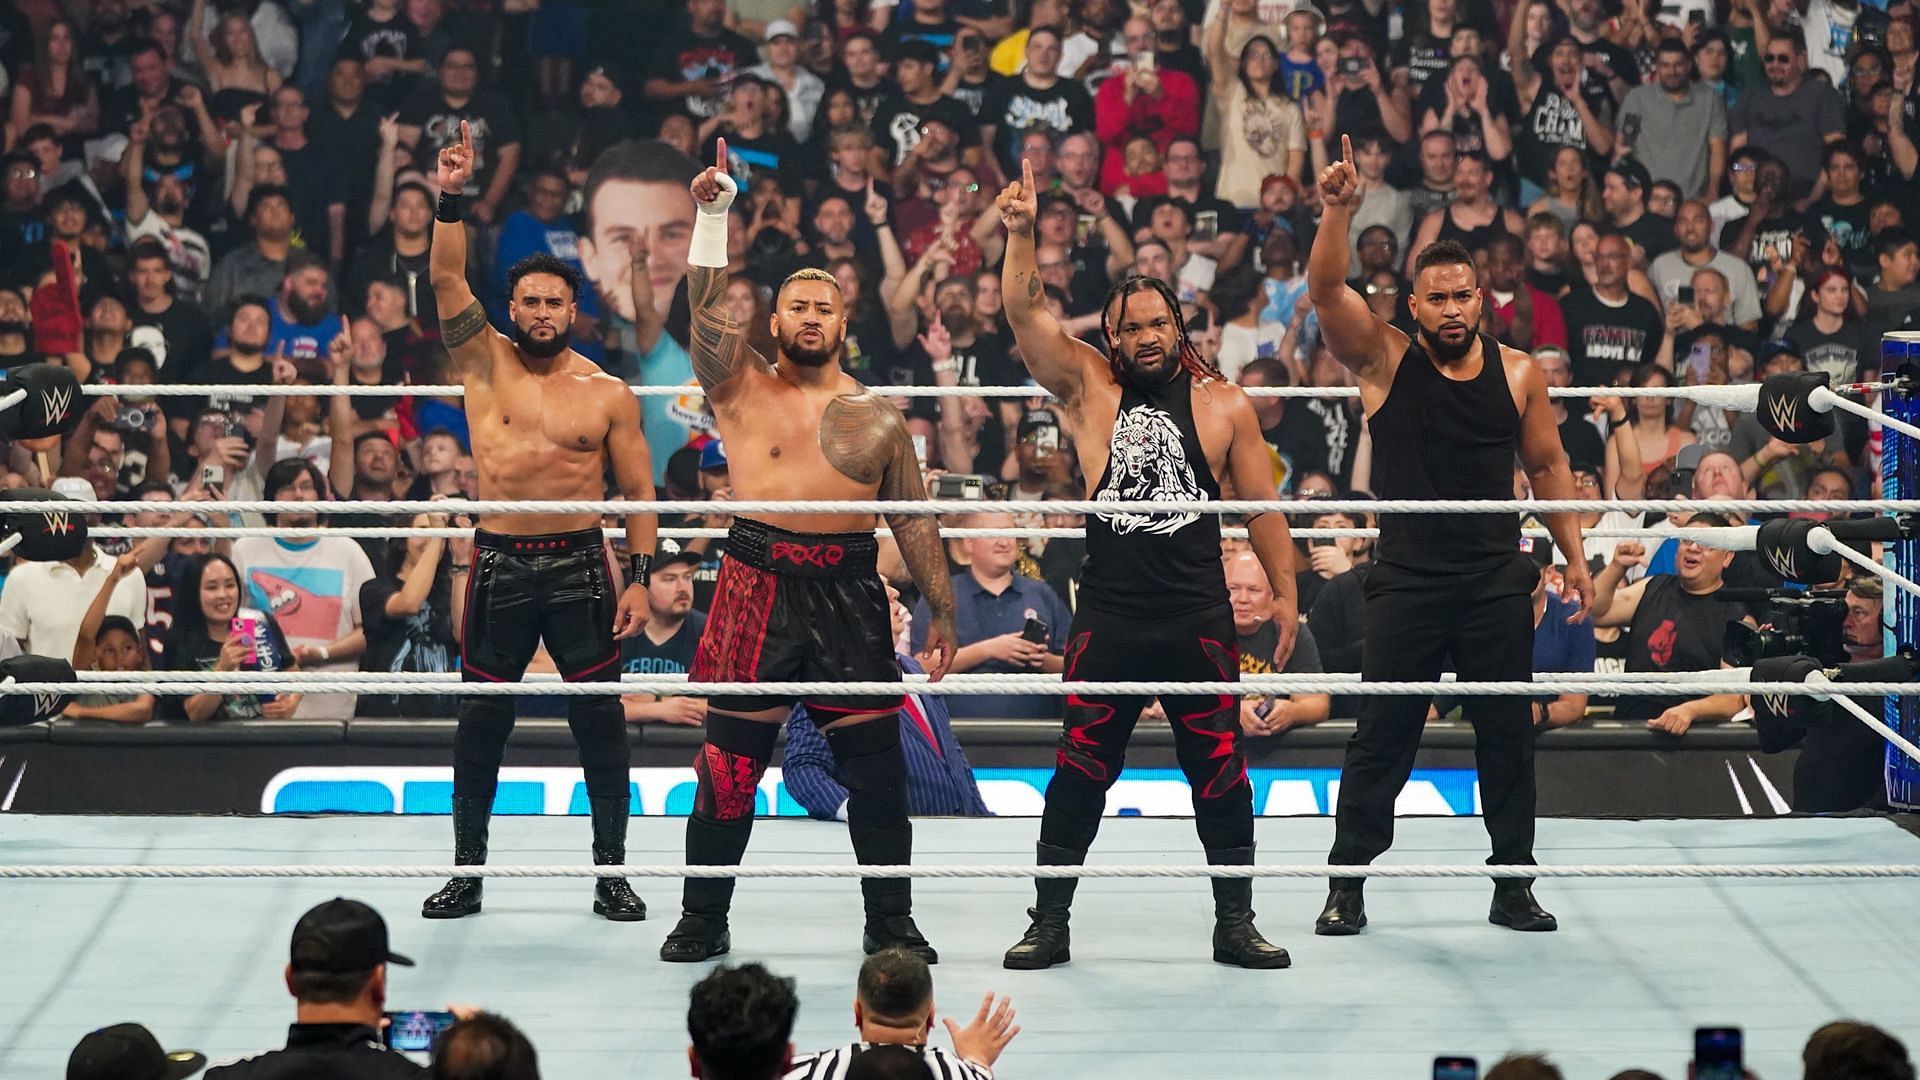 Jacob Fatu joined The Bloodline on SmackDown (credit: WWE on X)